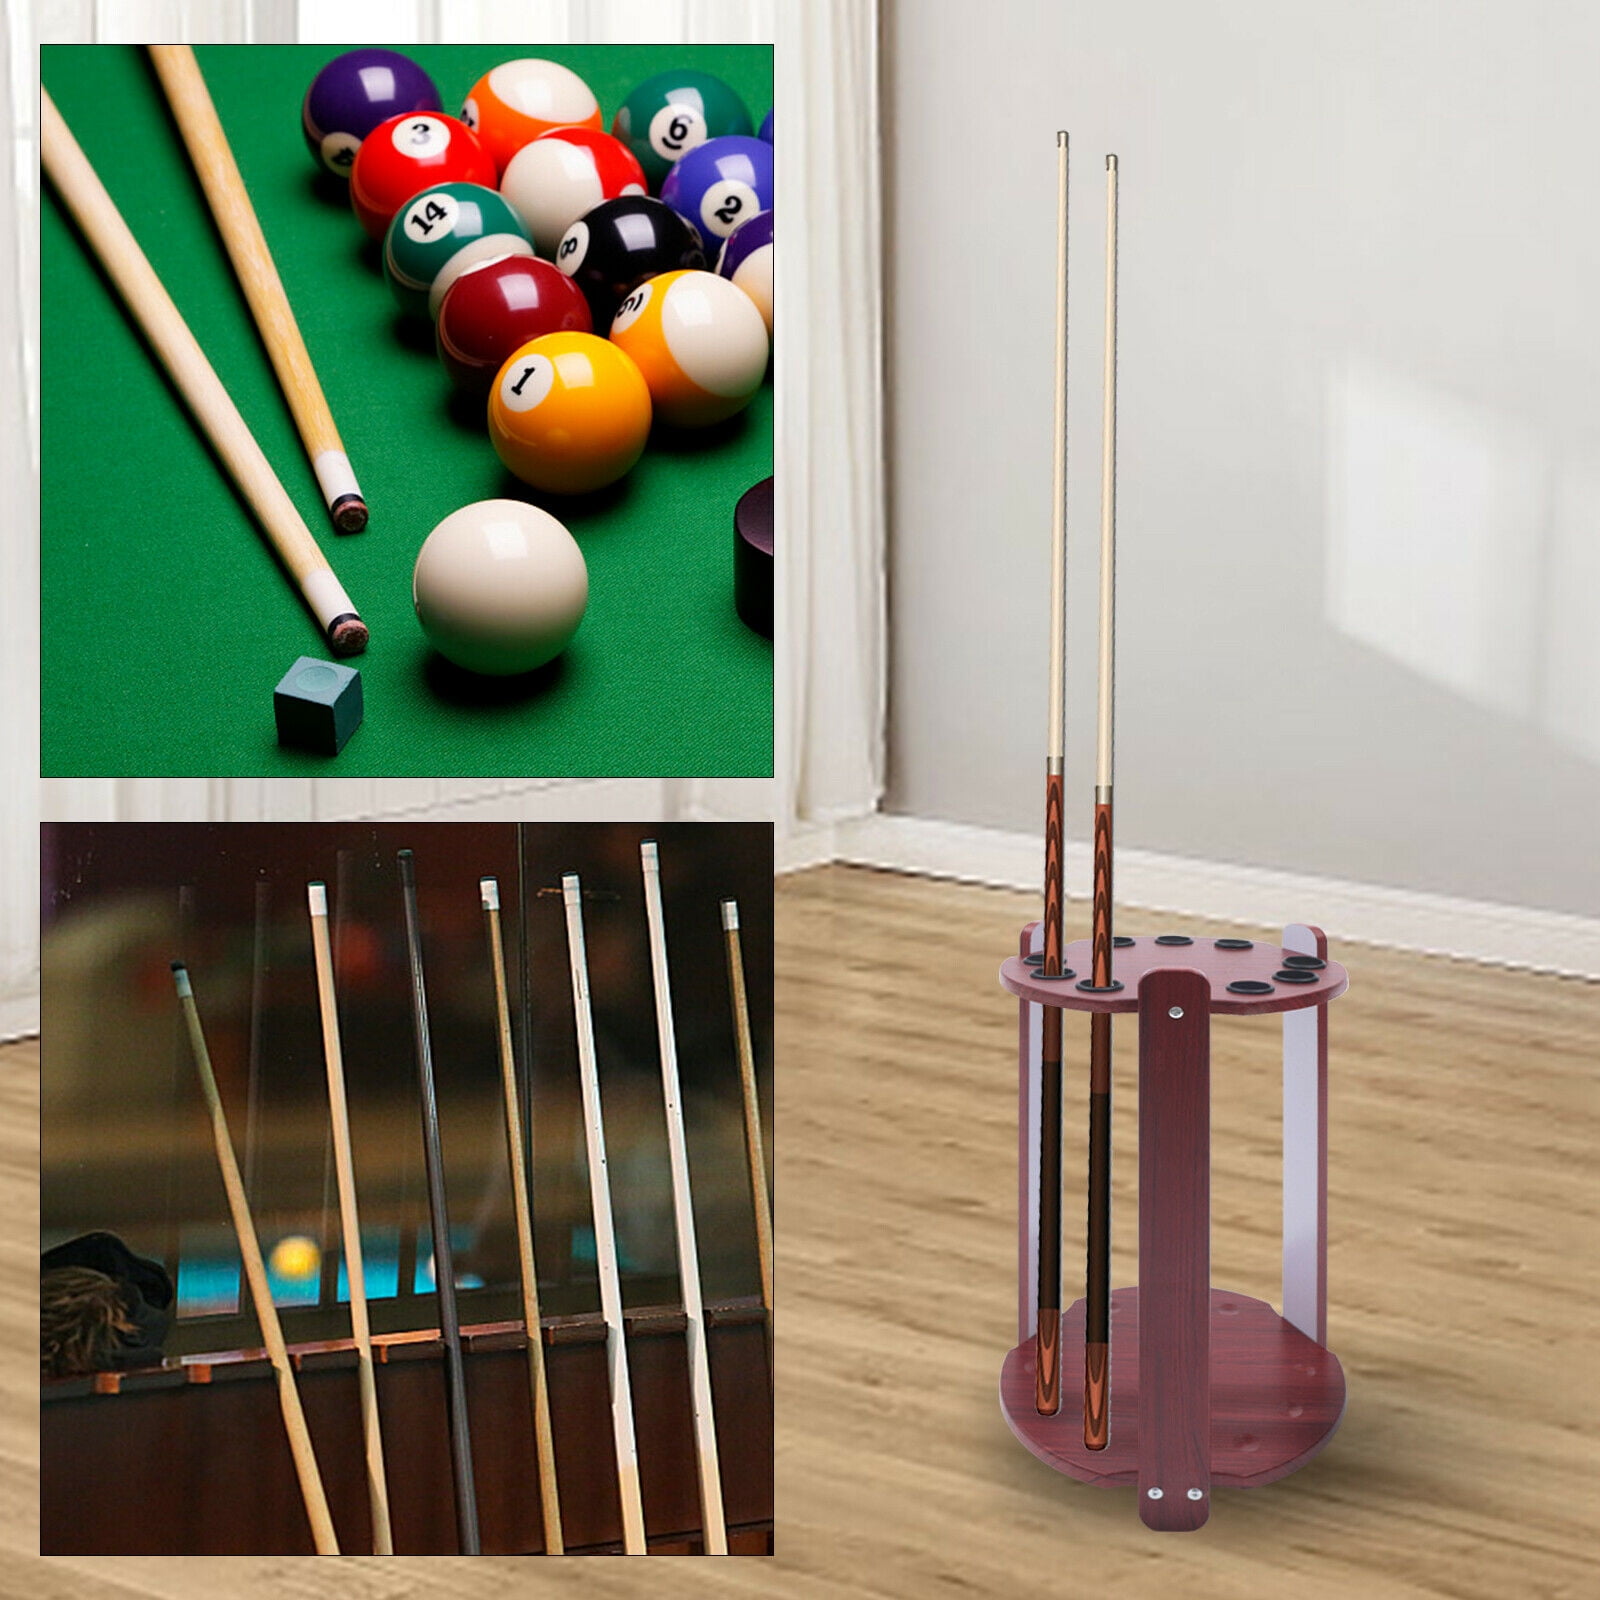 Portable Quality Billiards Snooker Pool Cues Stick Holder Stand Rest Rack 